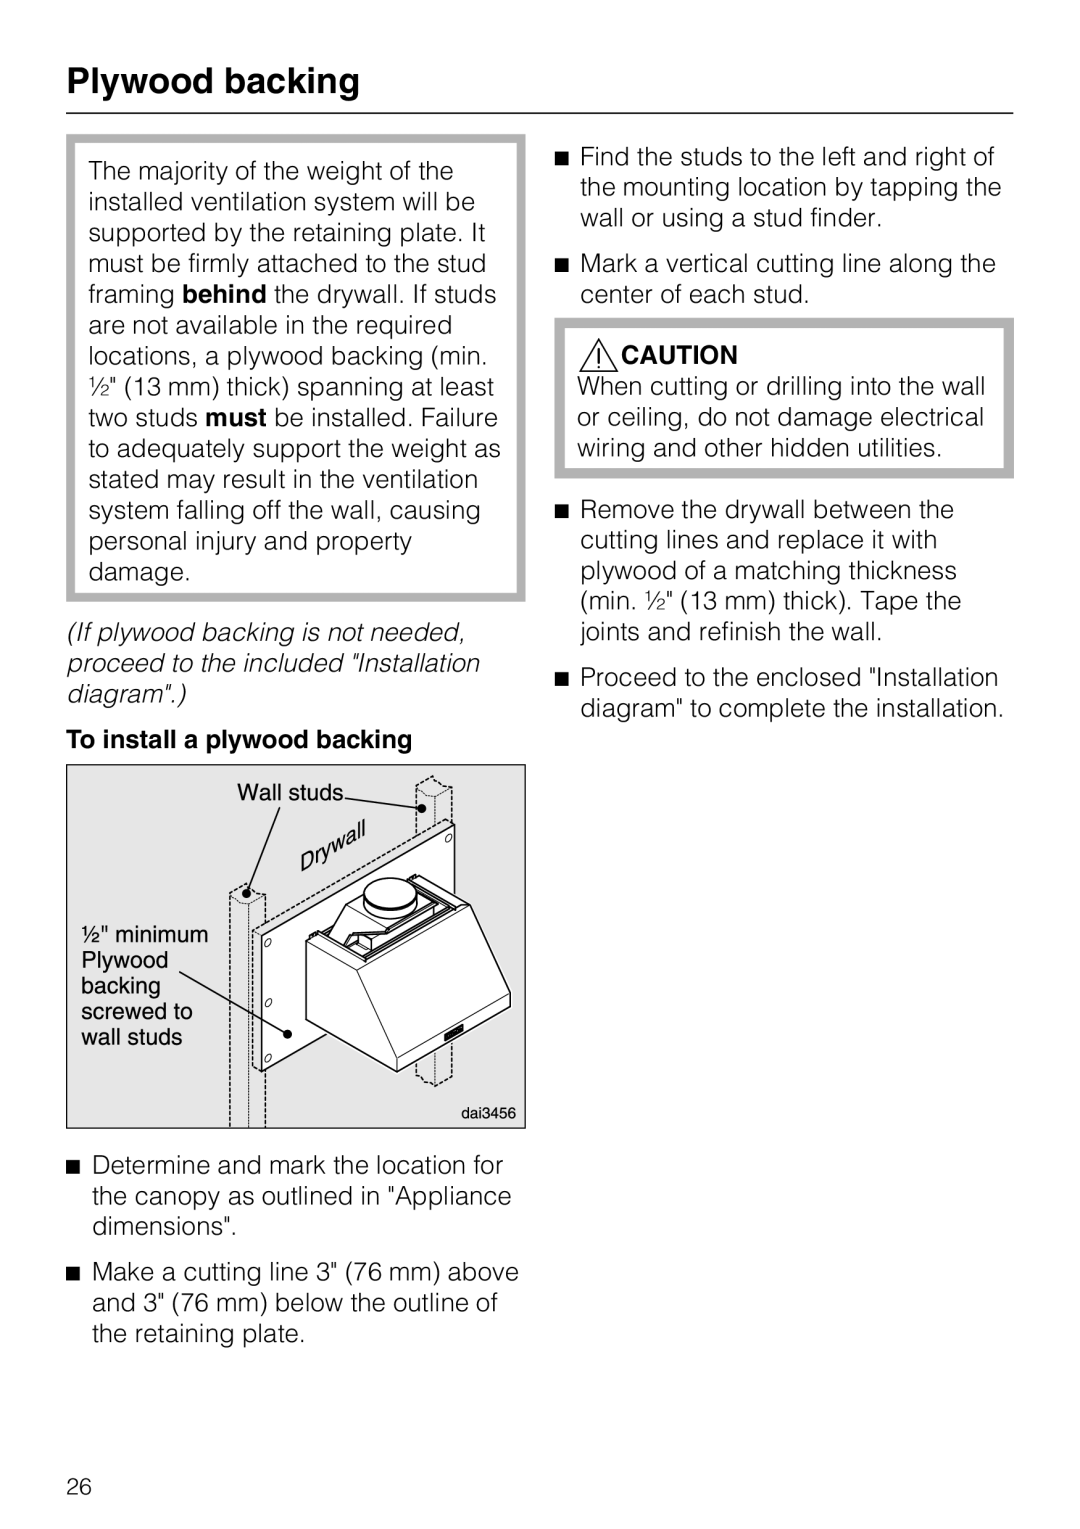 Miele 09 824 260 installation instructions Plywood backing, To install a plywood backing 